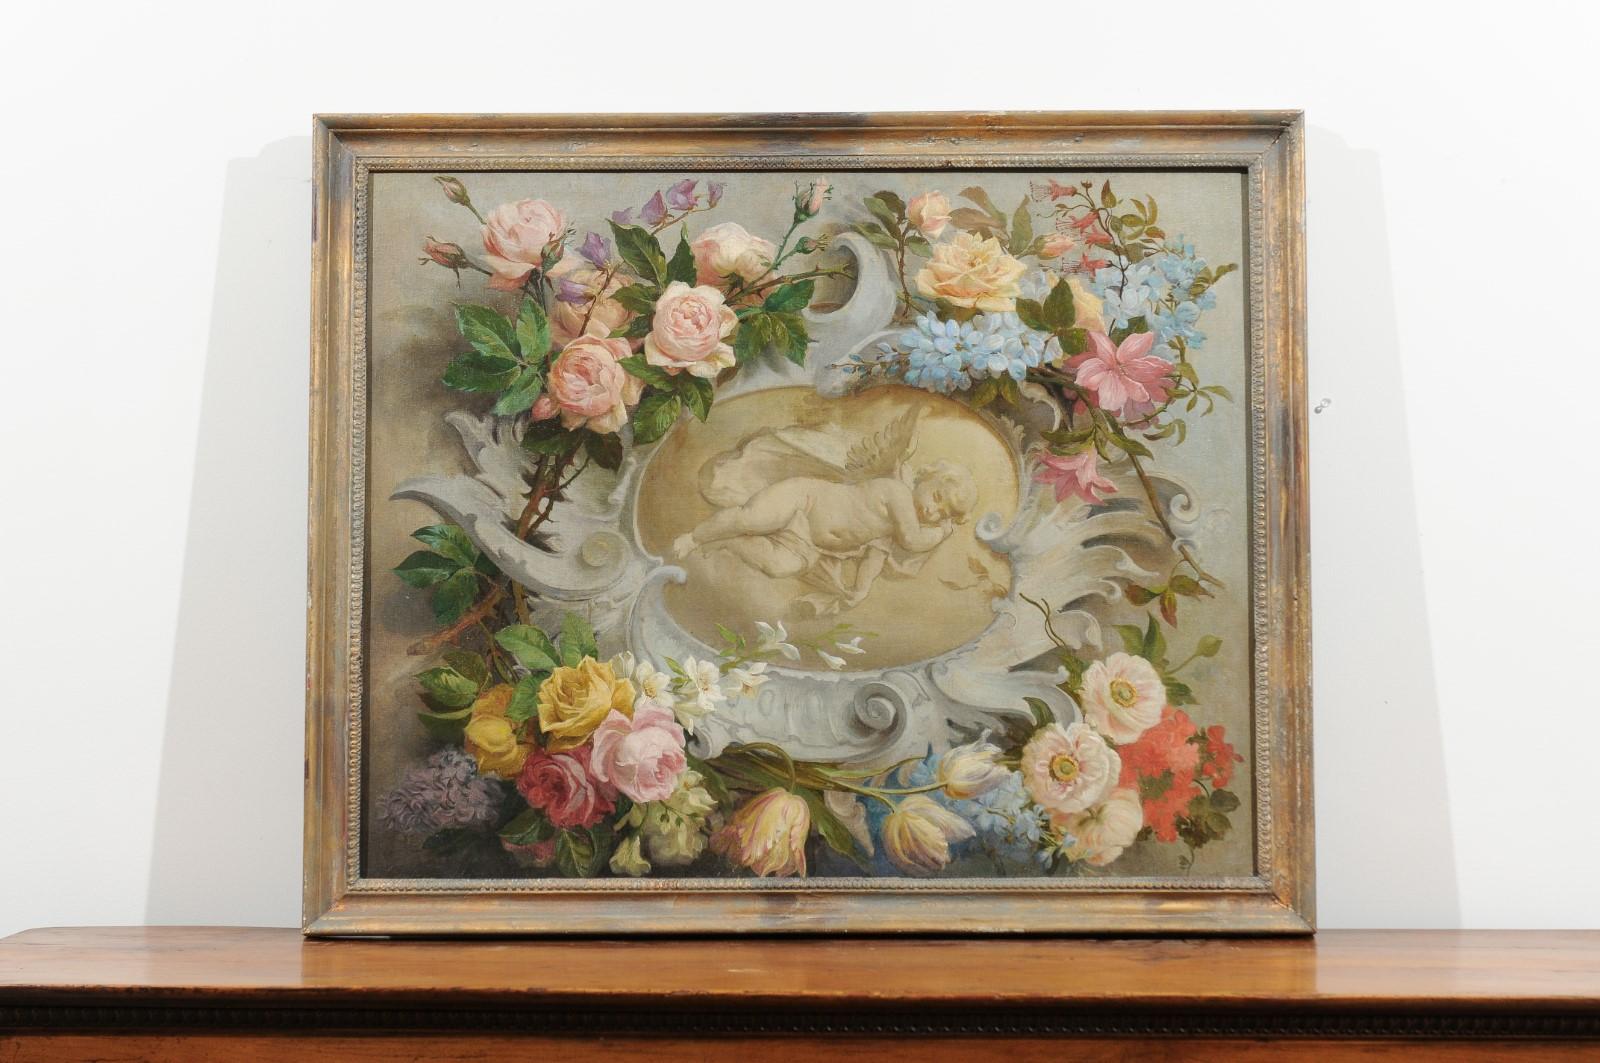 French 19th Century Aubusson Cartoon with Floral Decor Surrounding a Cherub For Sale 3